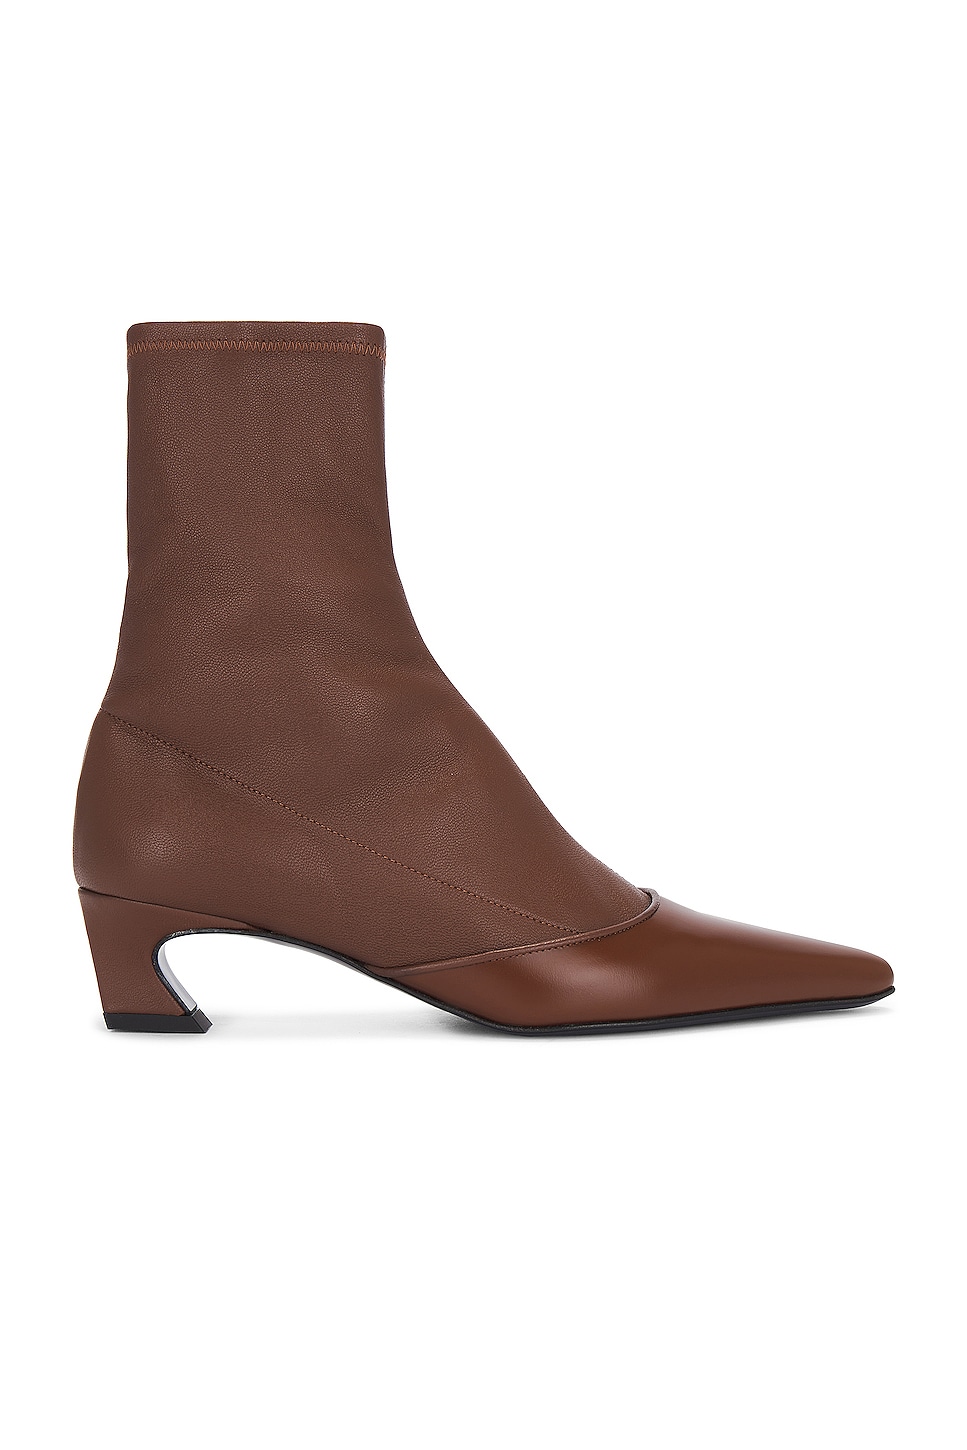 Image 1 of Acne Studios Ankle Boot in Cognac Brown